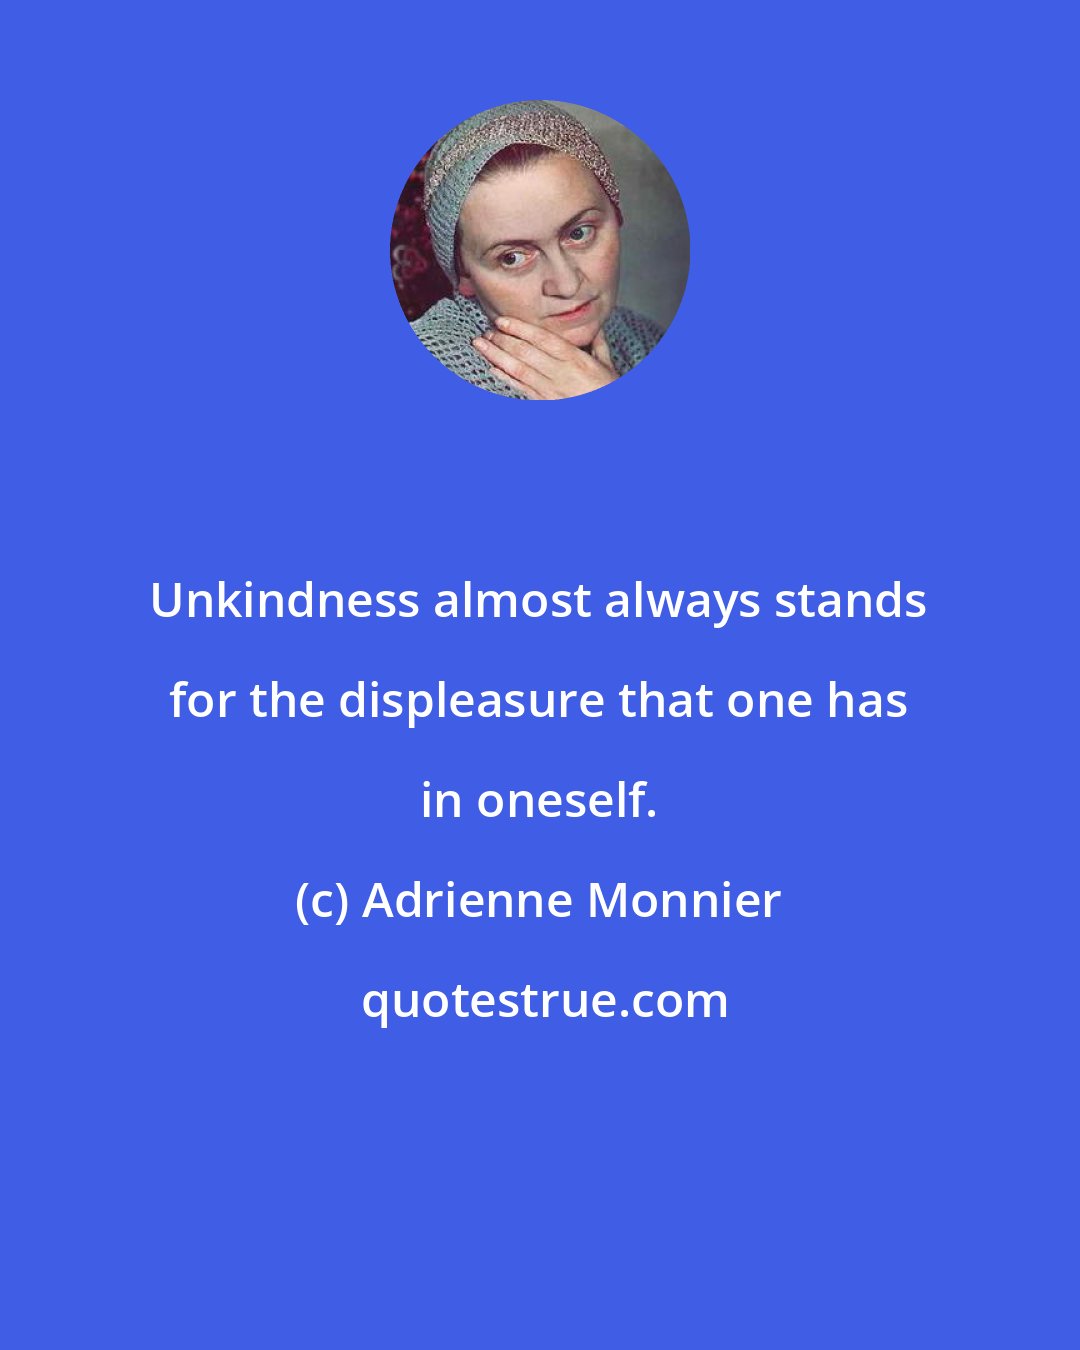 Adrienne Monnier: Unkindness almost always stands for the displeasure that one has in oneself.